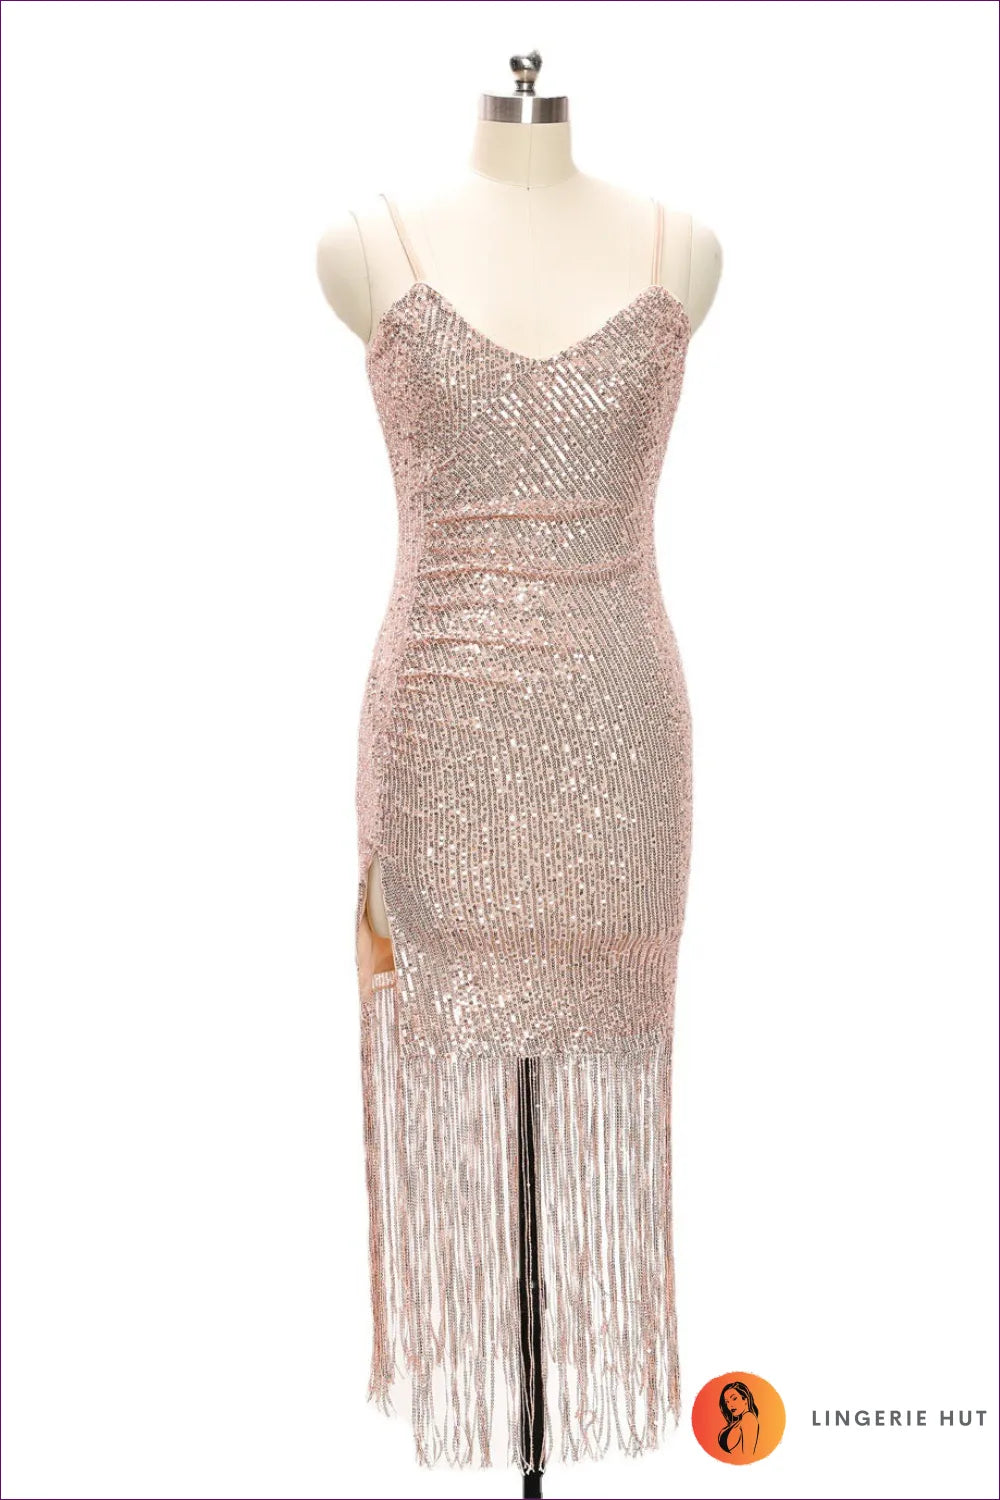 Get Ready To Turn Heads At Any Party With Our Sultry Sequined Bodycon Cami Dress Fringe. Slim And Sculpting,